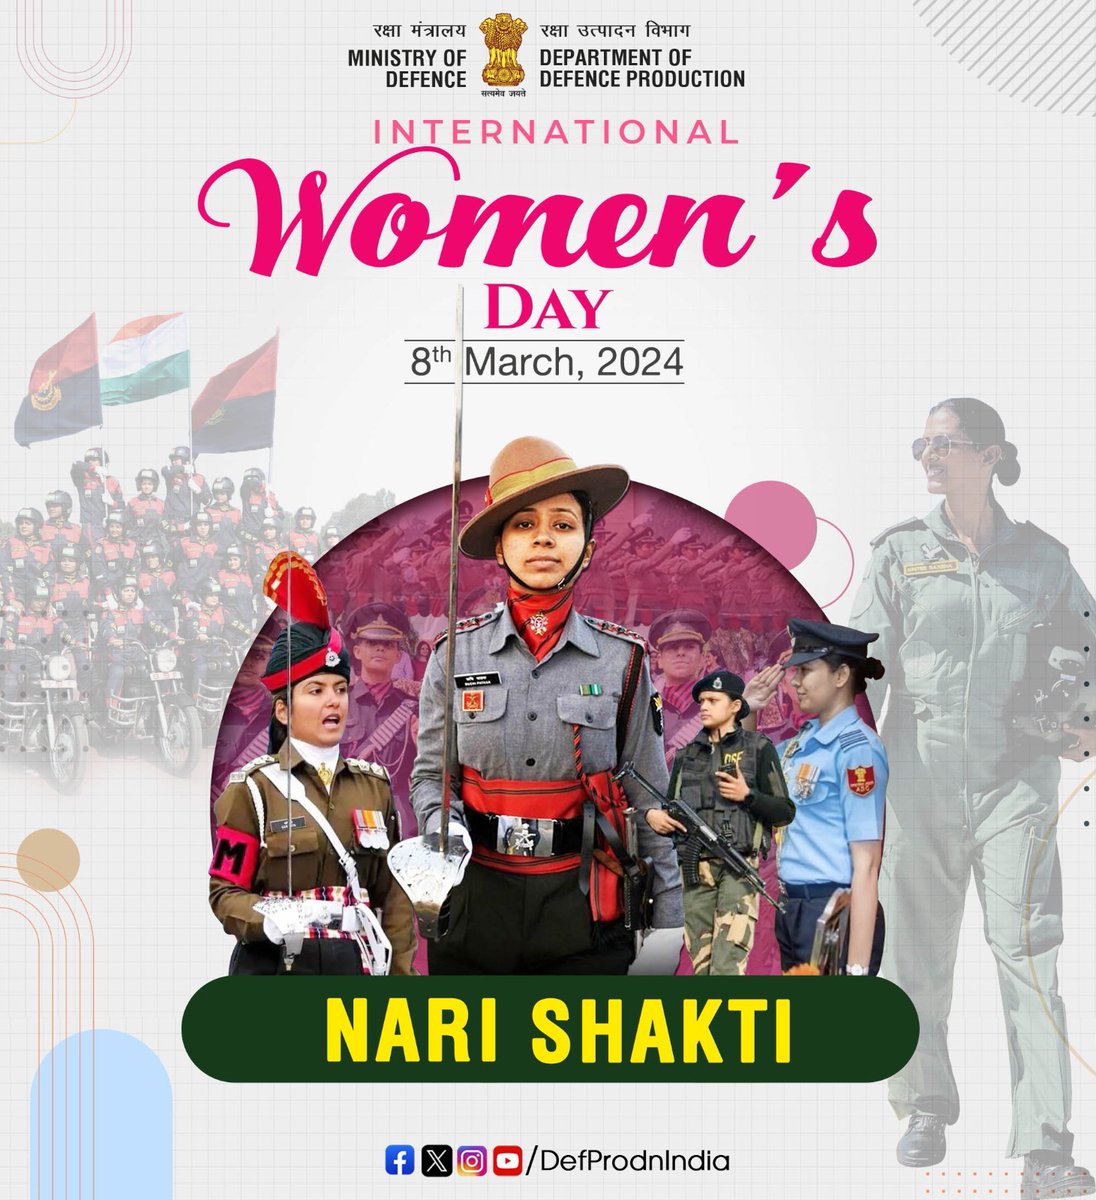 Saluting the unstoppable #NariShakti in Indian Defence & #ArmedForces on this #InternationalWomensDay   . Their courage, dedication, & strength inspire us all. Let's celebrate their remarkable contributions to our nation's security and progress. #InternationalWomensDay2024